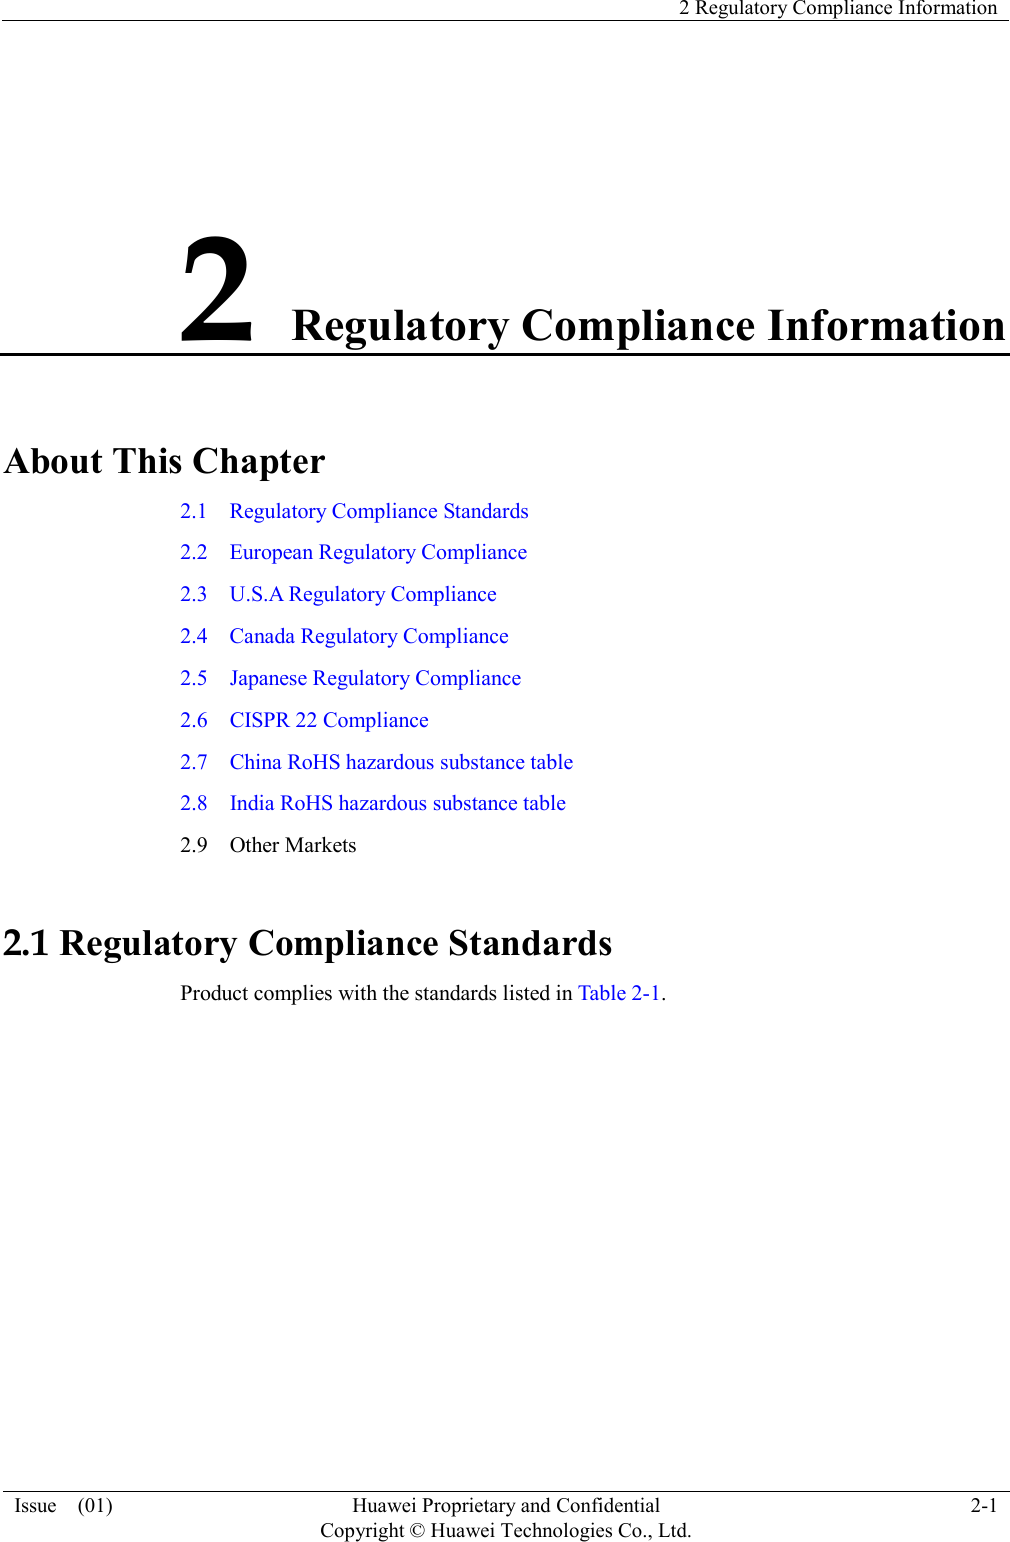   2 Regulatory Compliance Information  Issue    (01) Huawei Proprietary and Confidential                                     Copyright © Huawei Technologies Co., Ltd. 2-1  2 Regulatory Compliance Information About This Chapter 2.1    Regulatory Compliance Standards 2.2    European Regulatory Compliance 2.3    U.S.A Regulatory Compliance                                           2.4    Canada Regulatory Compliance 2.5  Japanese Regulatory Compliance 2.6  CISPR 22 Compliance   2.7  China RoHS hazardous substance table 2.8  India RoHS hazardous substance table 2.9  Other Markets 2.1 Regulatory Compliance Standards Product complies with the standards listed in Table 2-1. 